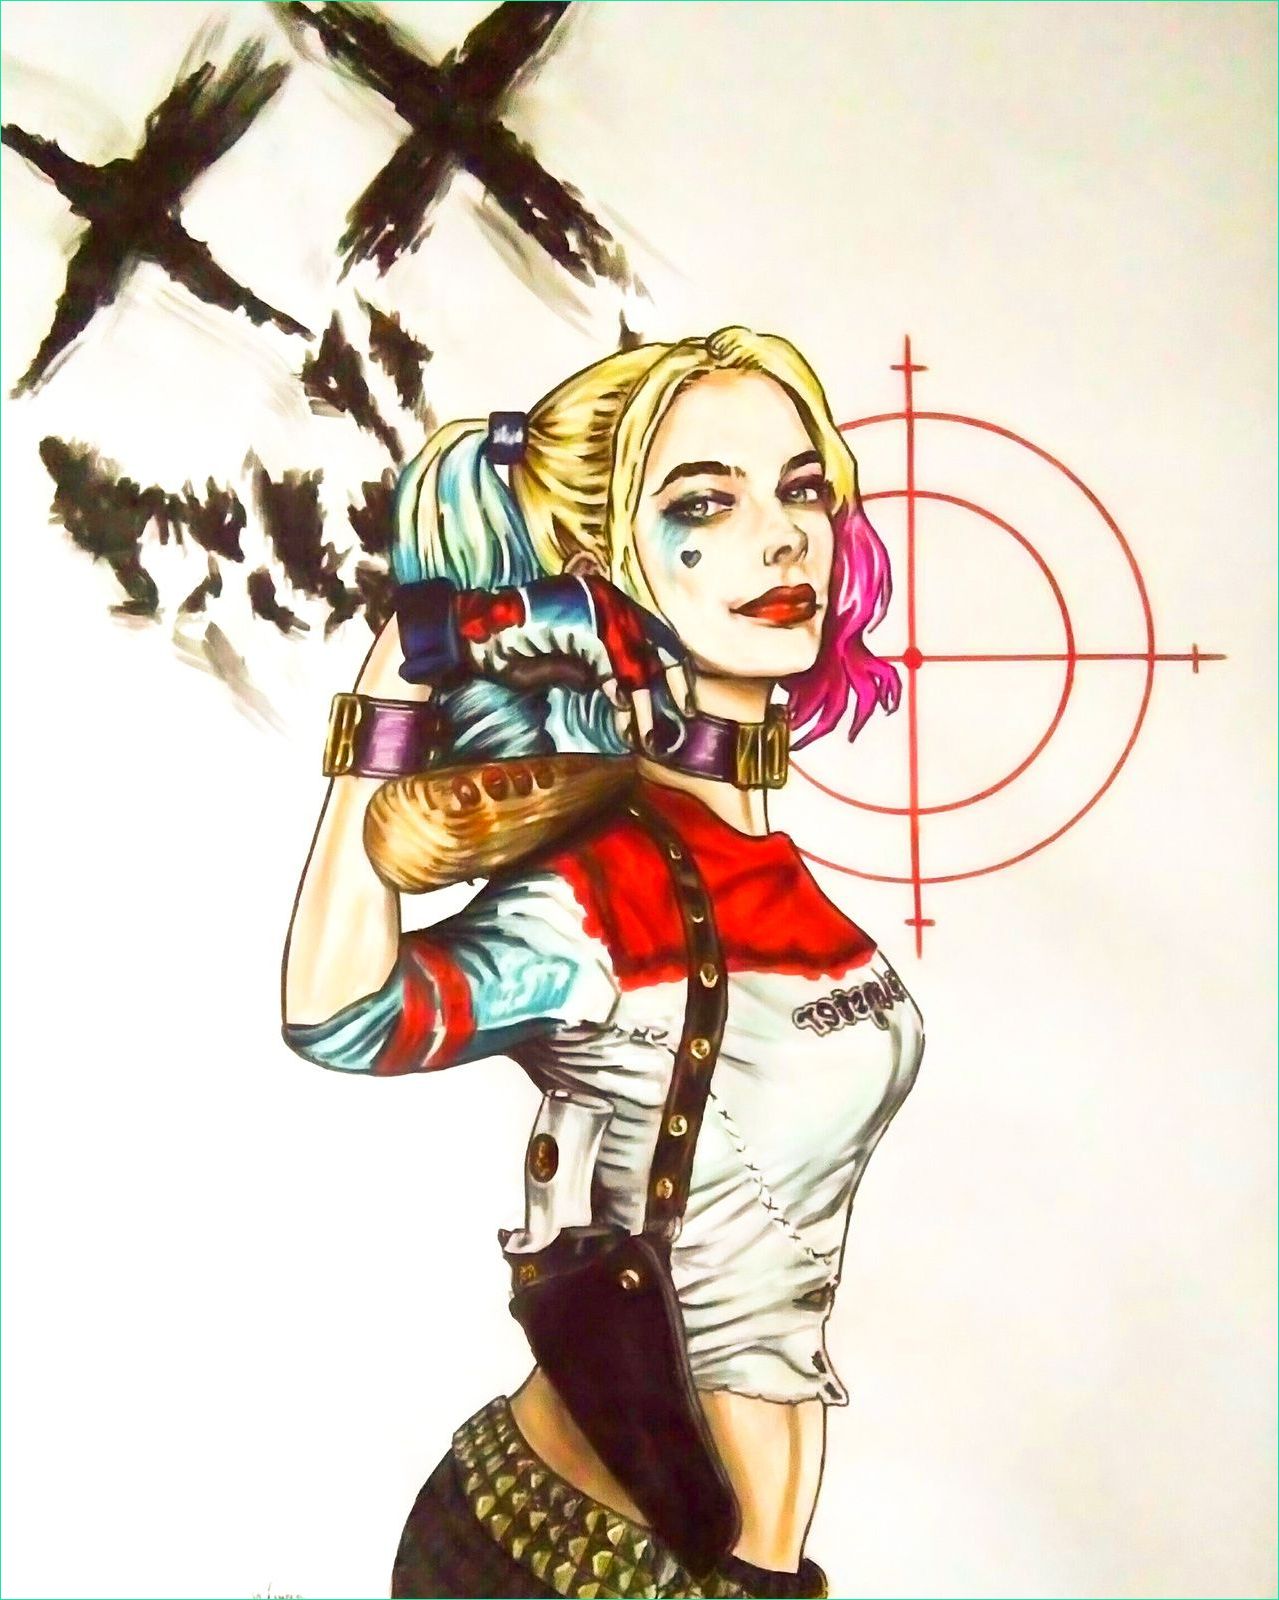 Dessin Harley Quinn A Colorier Luxe Images Meilleures Collections Harley Quinn Dessin Manga Facile